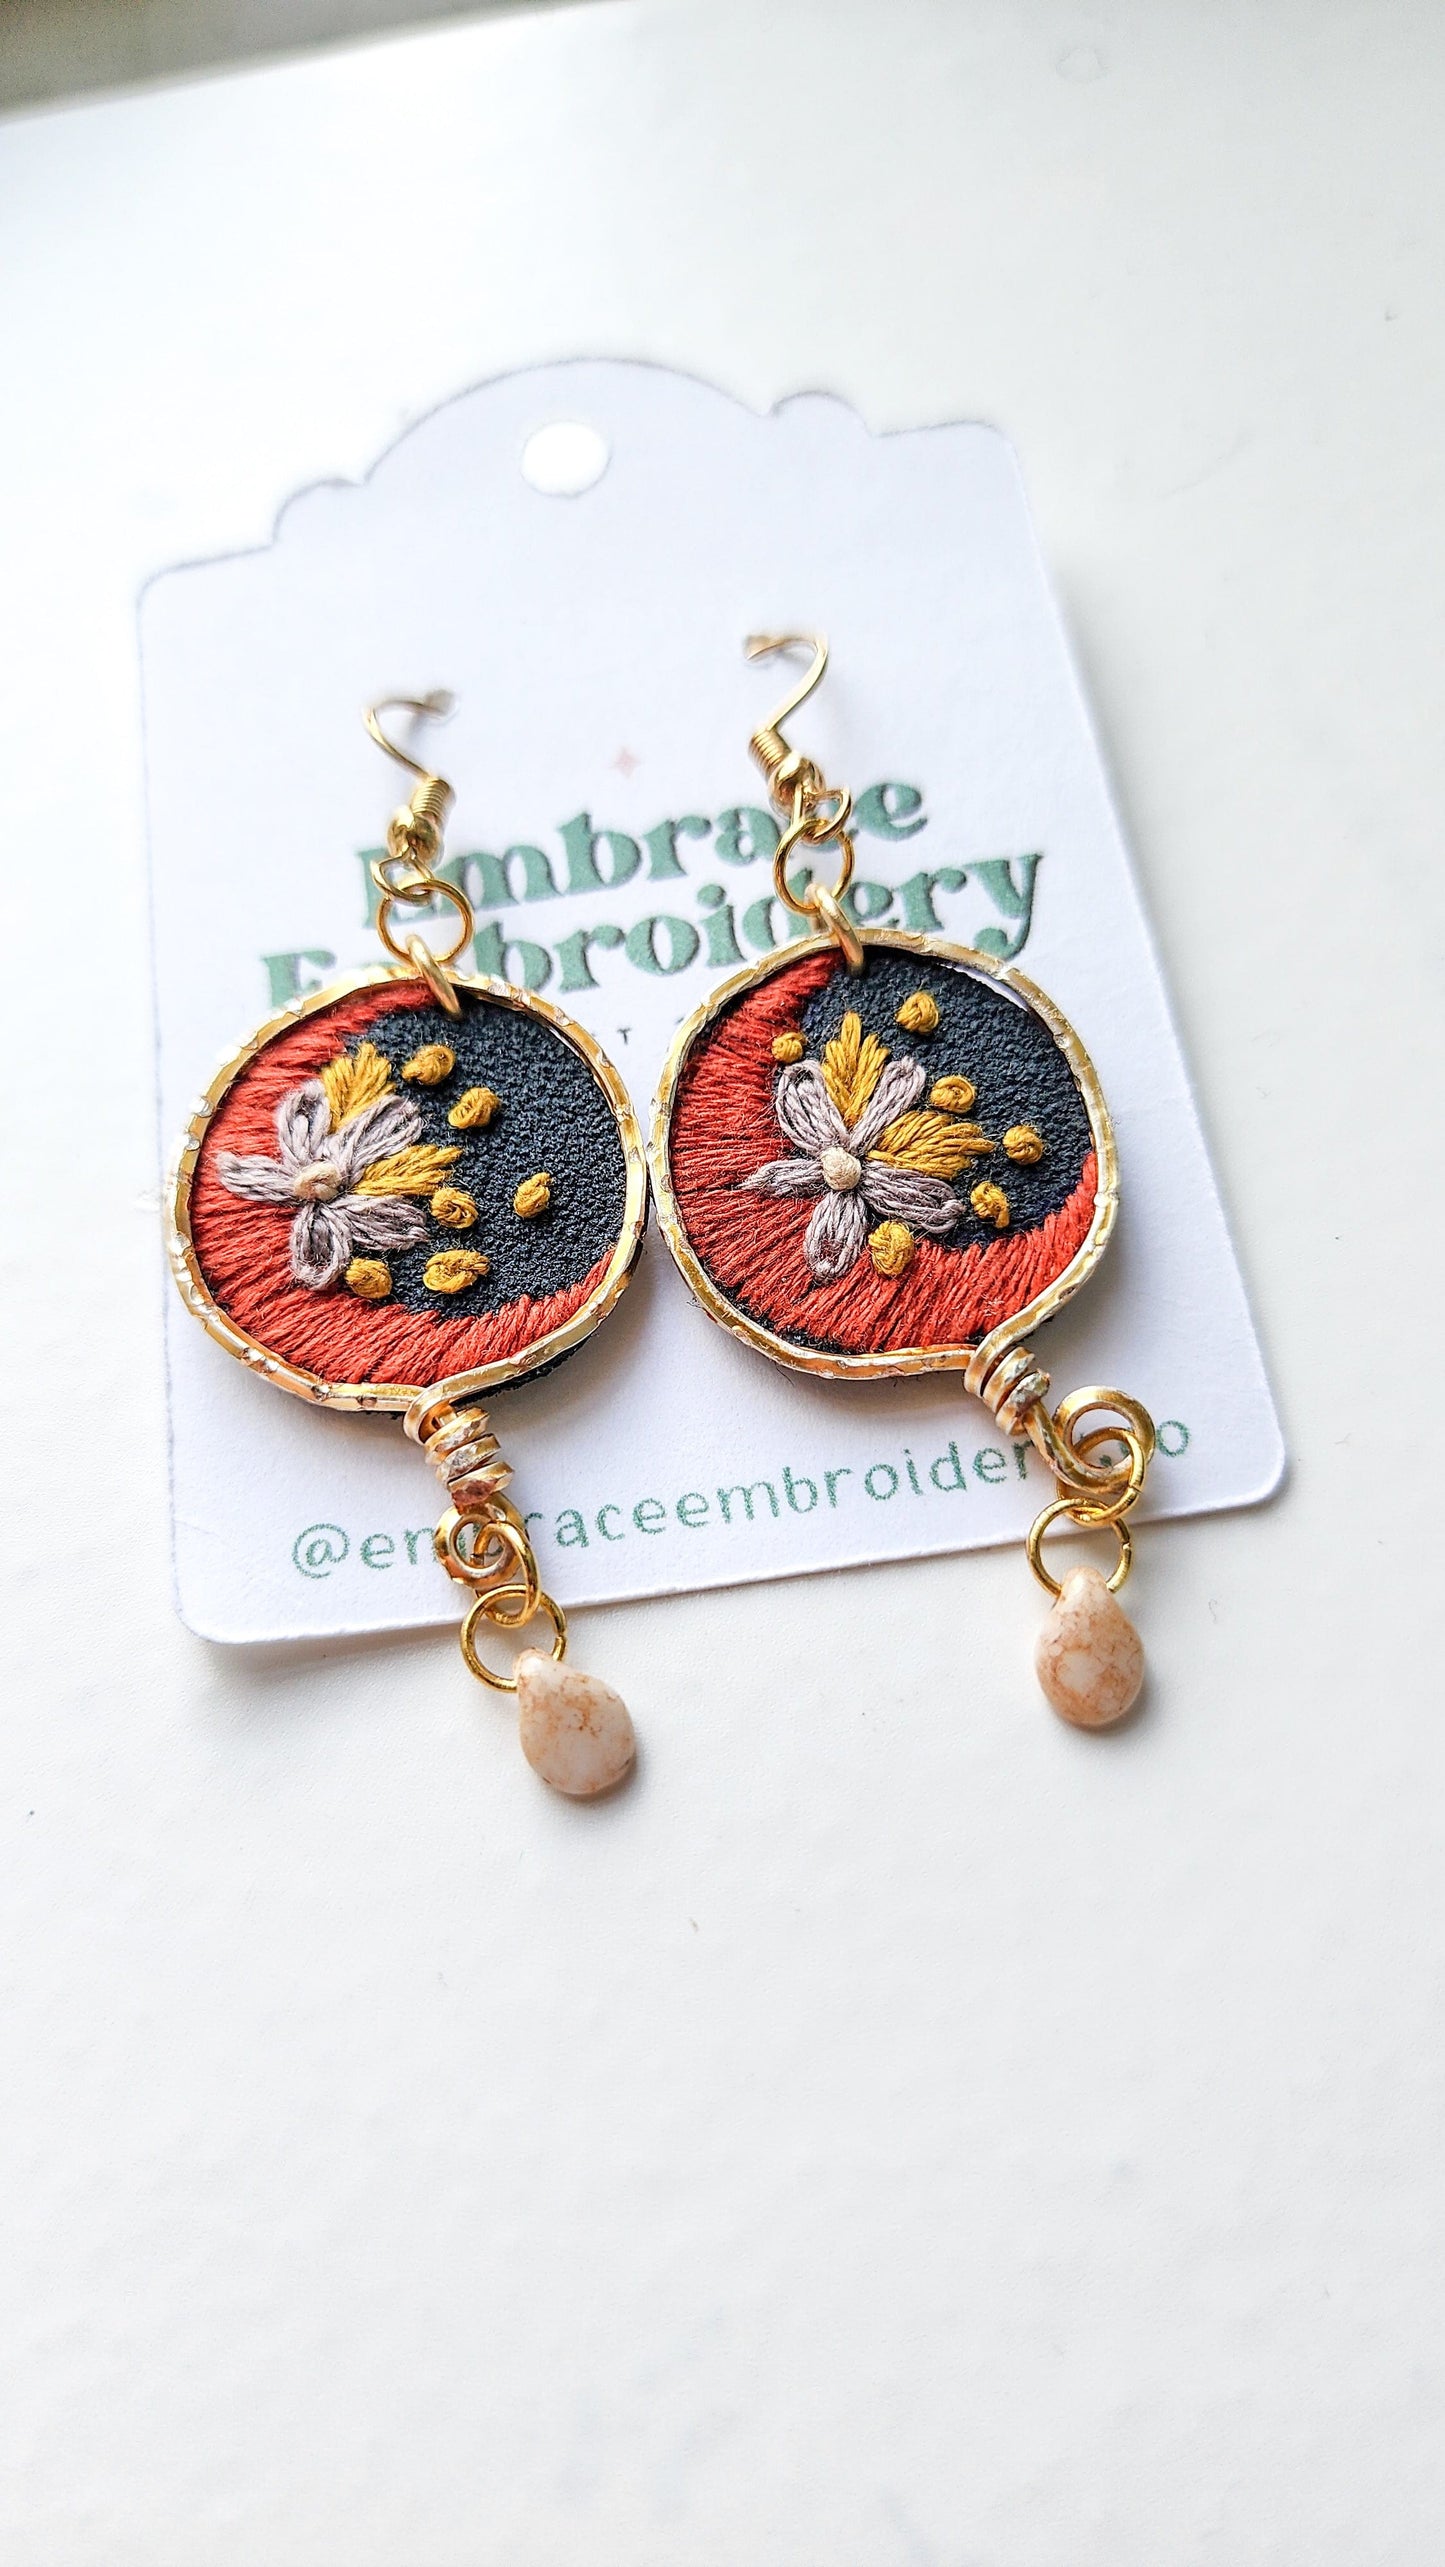 Embrace Embroidery Midnight Moon - Hand Embroidered Earrings